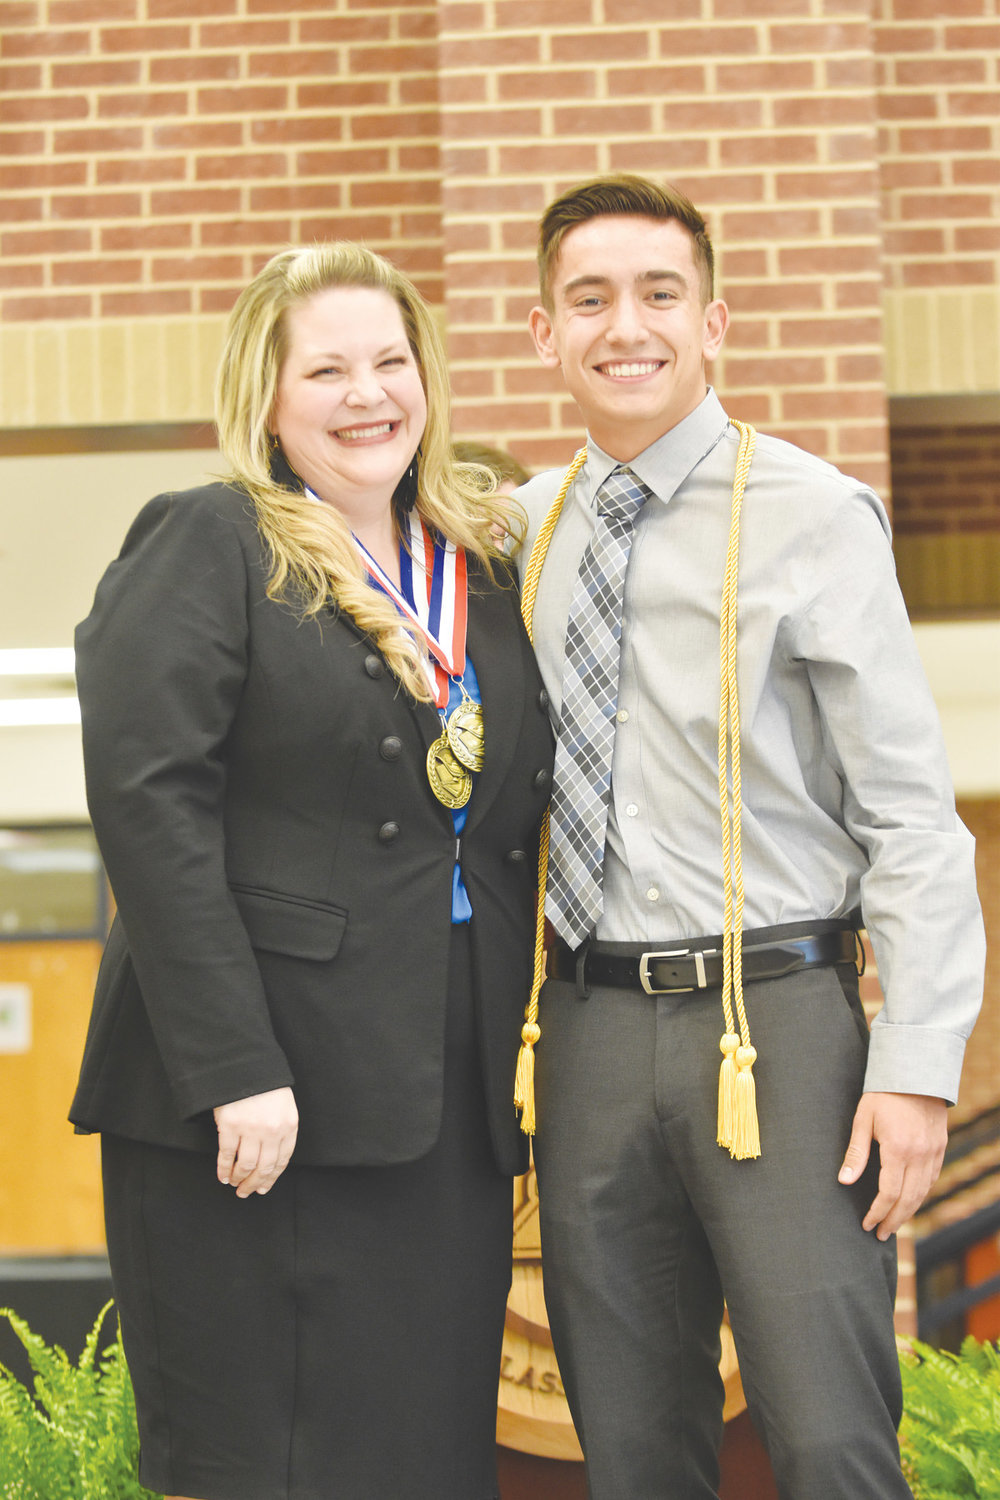 Cole Bohnen is the son of Shane and Robin Bohnen. Cole plans to attend the University of Notre Dame, and study management consulting. He honored Mrs. Amber Wheeler.